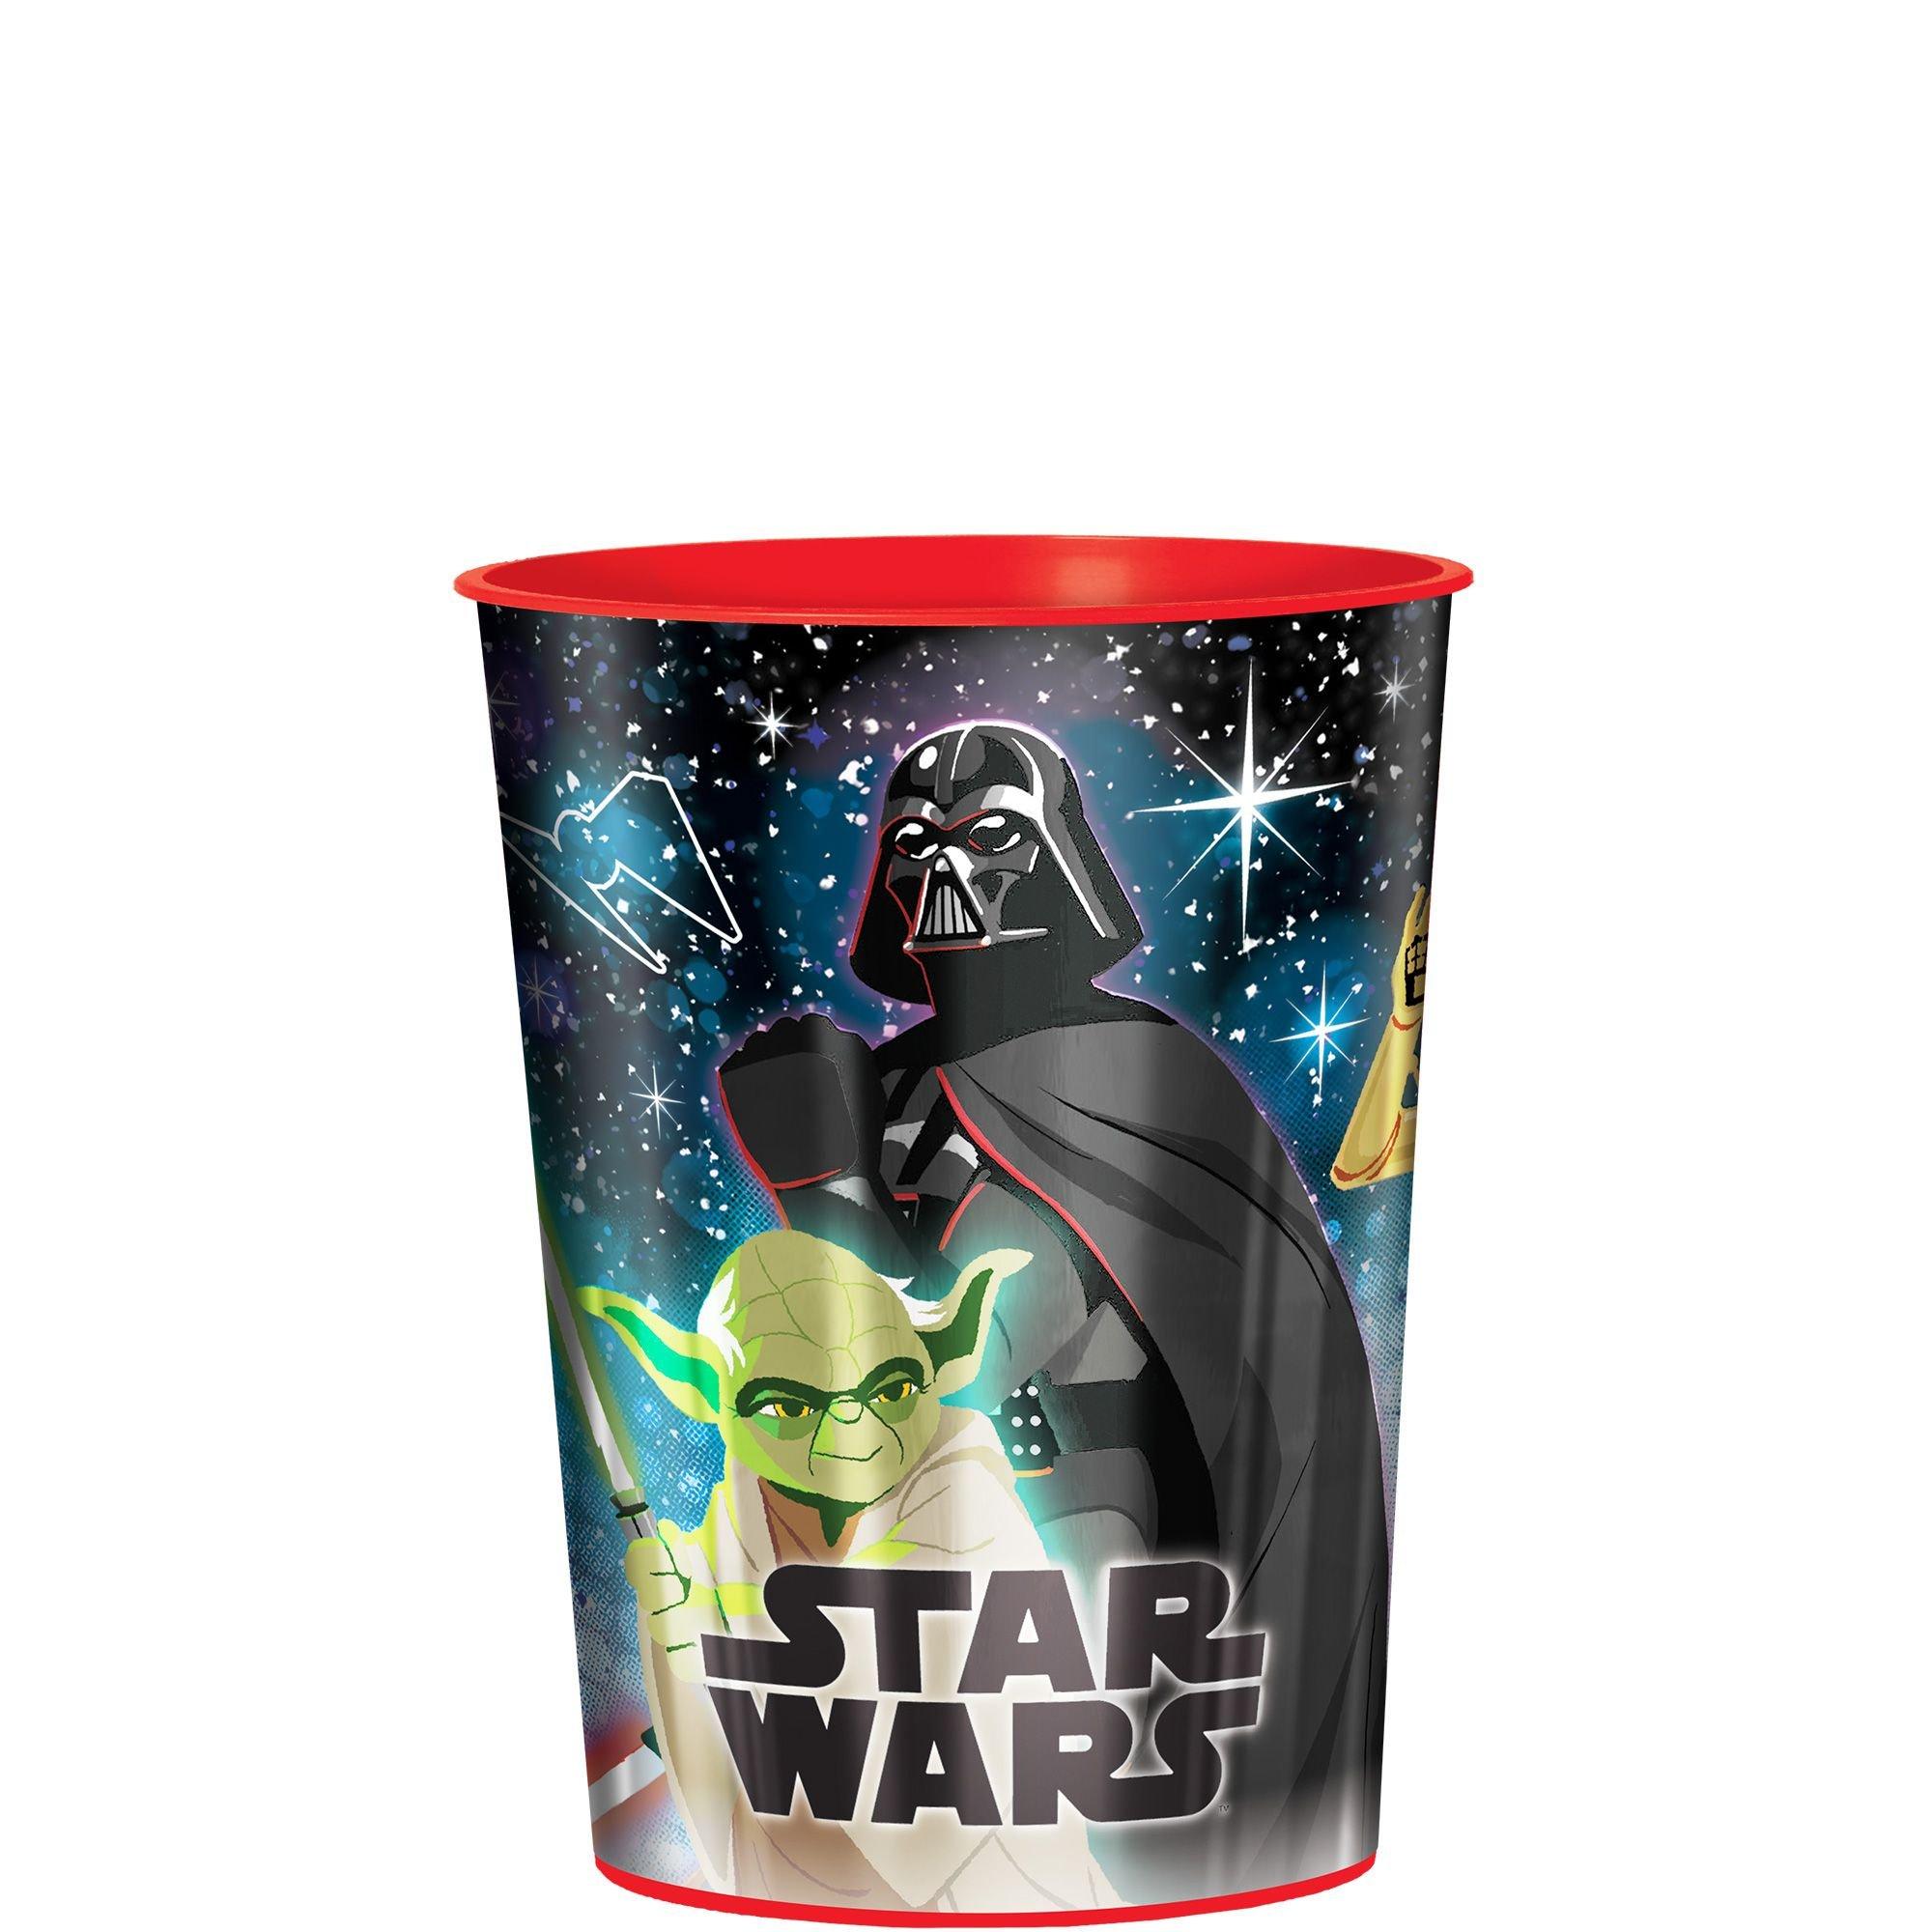 Save up to 65% on Star Wars-themed drinkware at